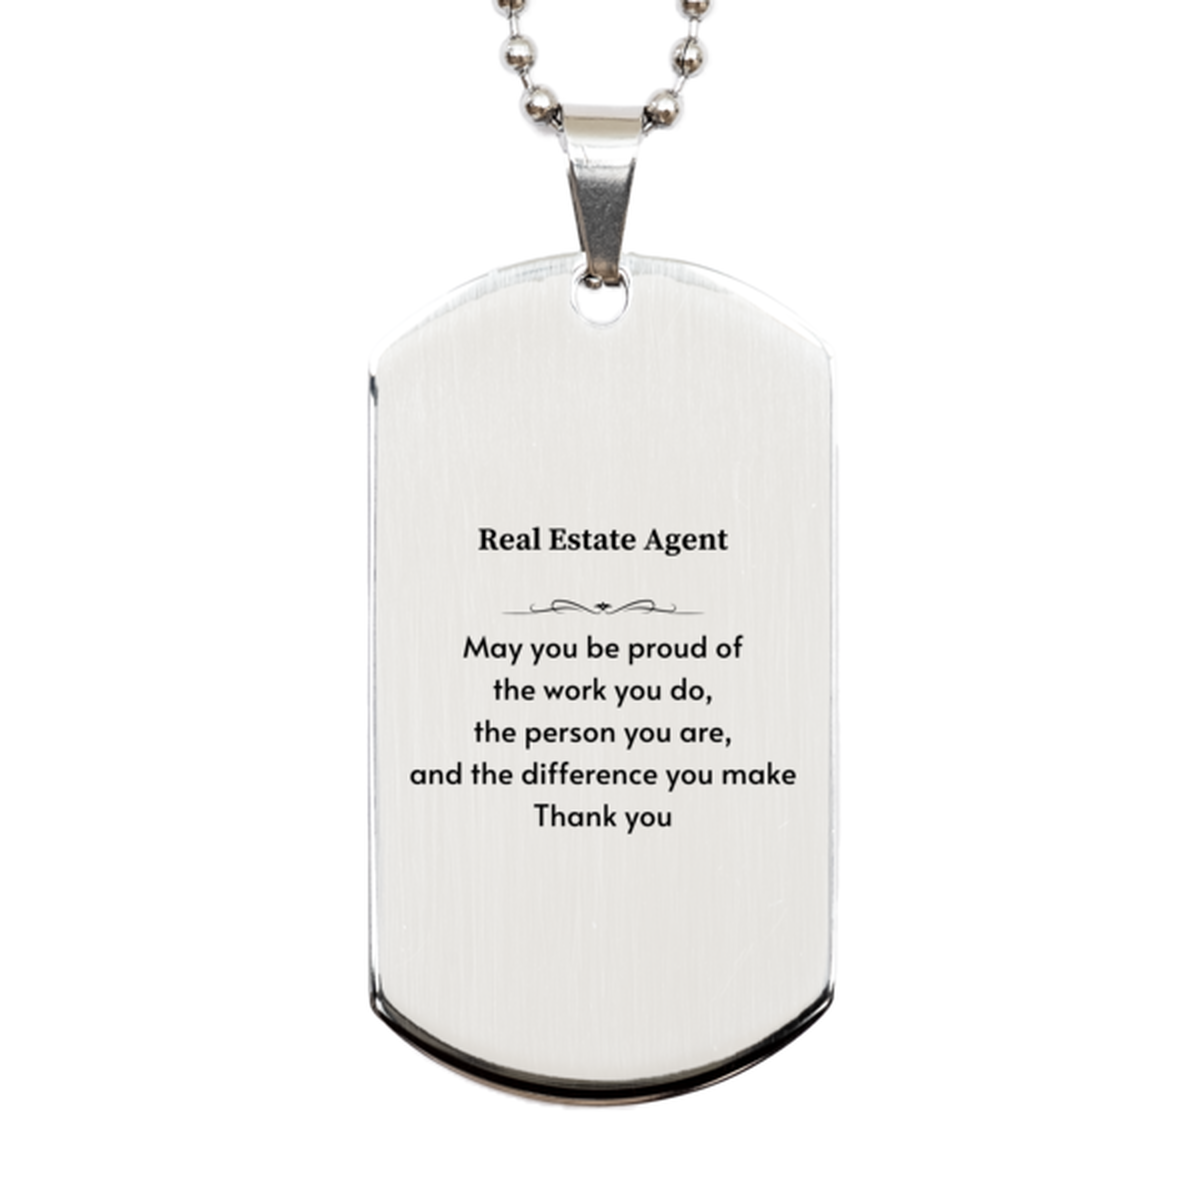 Heartwarming Silver Dog Tag Retirement Coworkers Gifts for Real Estate Agent, Real Estate Agent May You be proud of the work you do, the person you are Gifts for Boss Men Women Friends